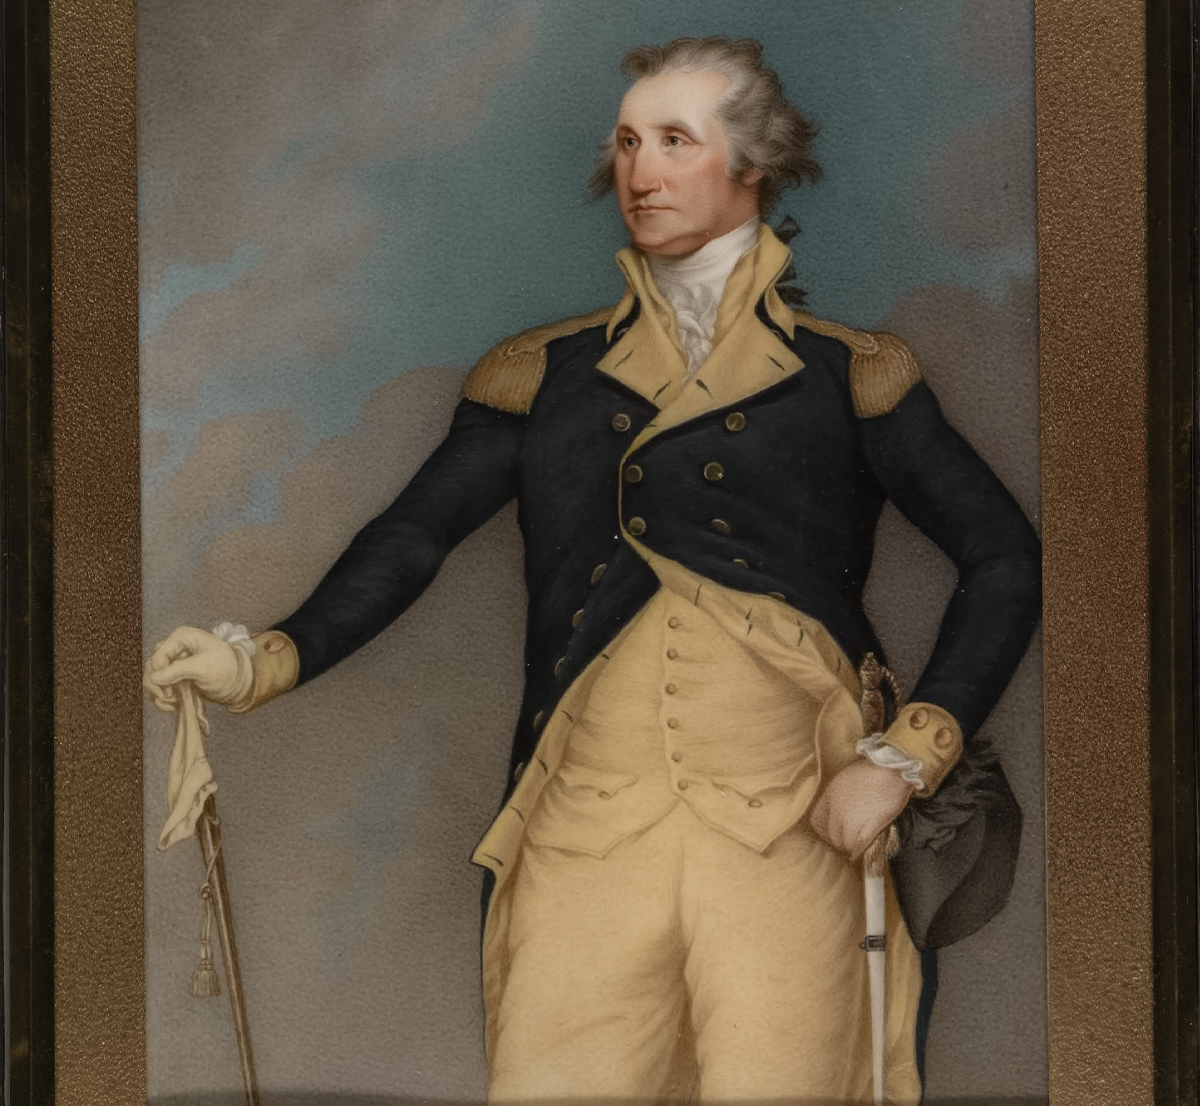 “General George Washington,” a watercolor on ivory painting by Henry Brintnell Bounetheau (1797-1877), in the manner of John Trumbull